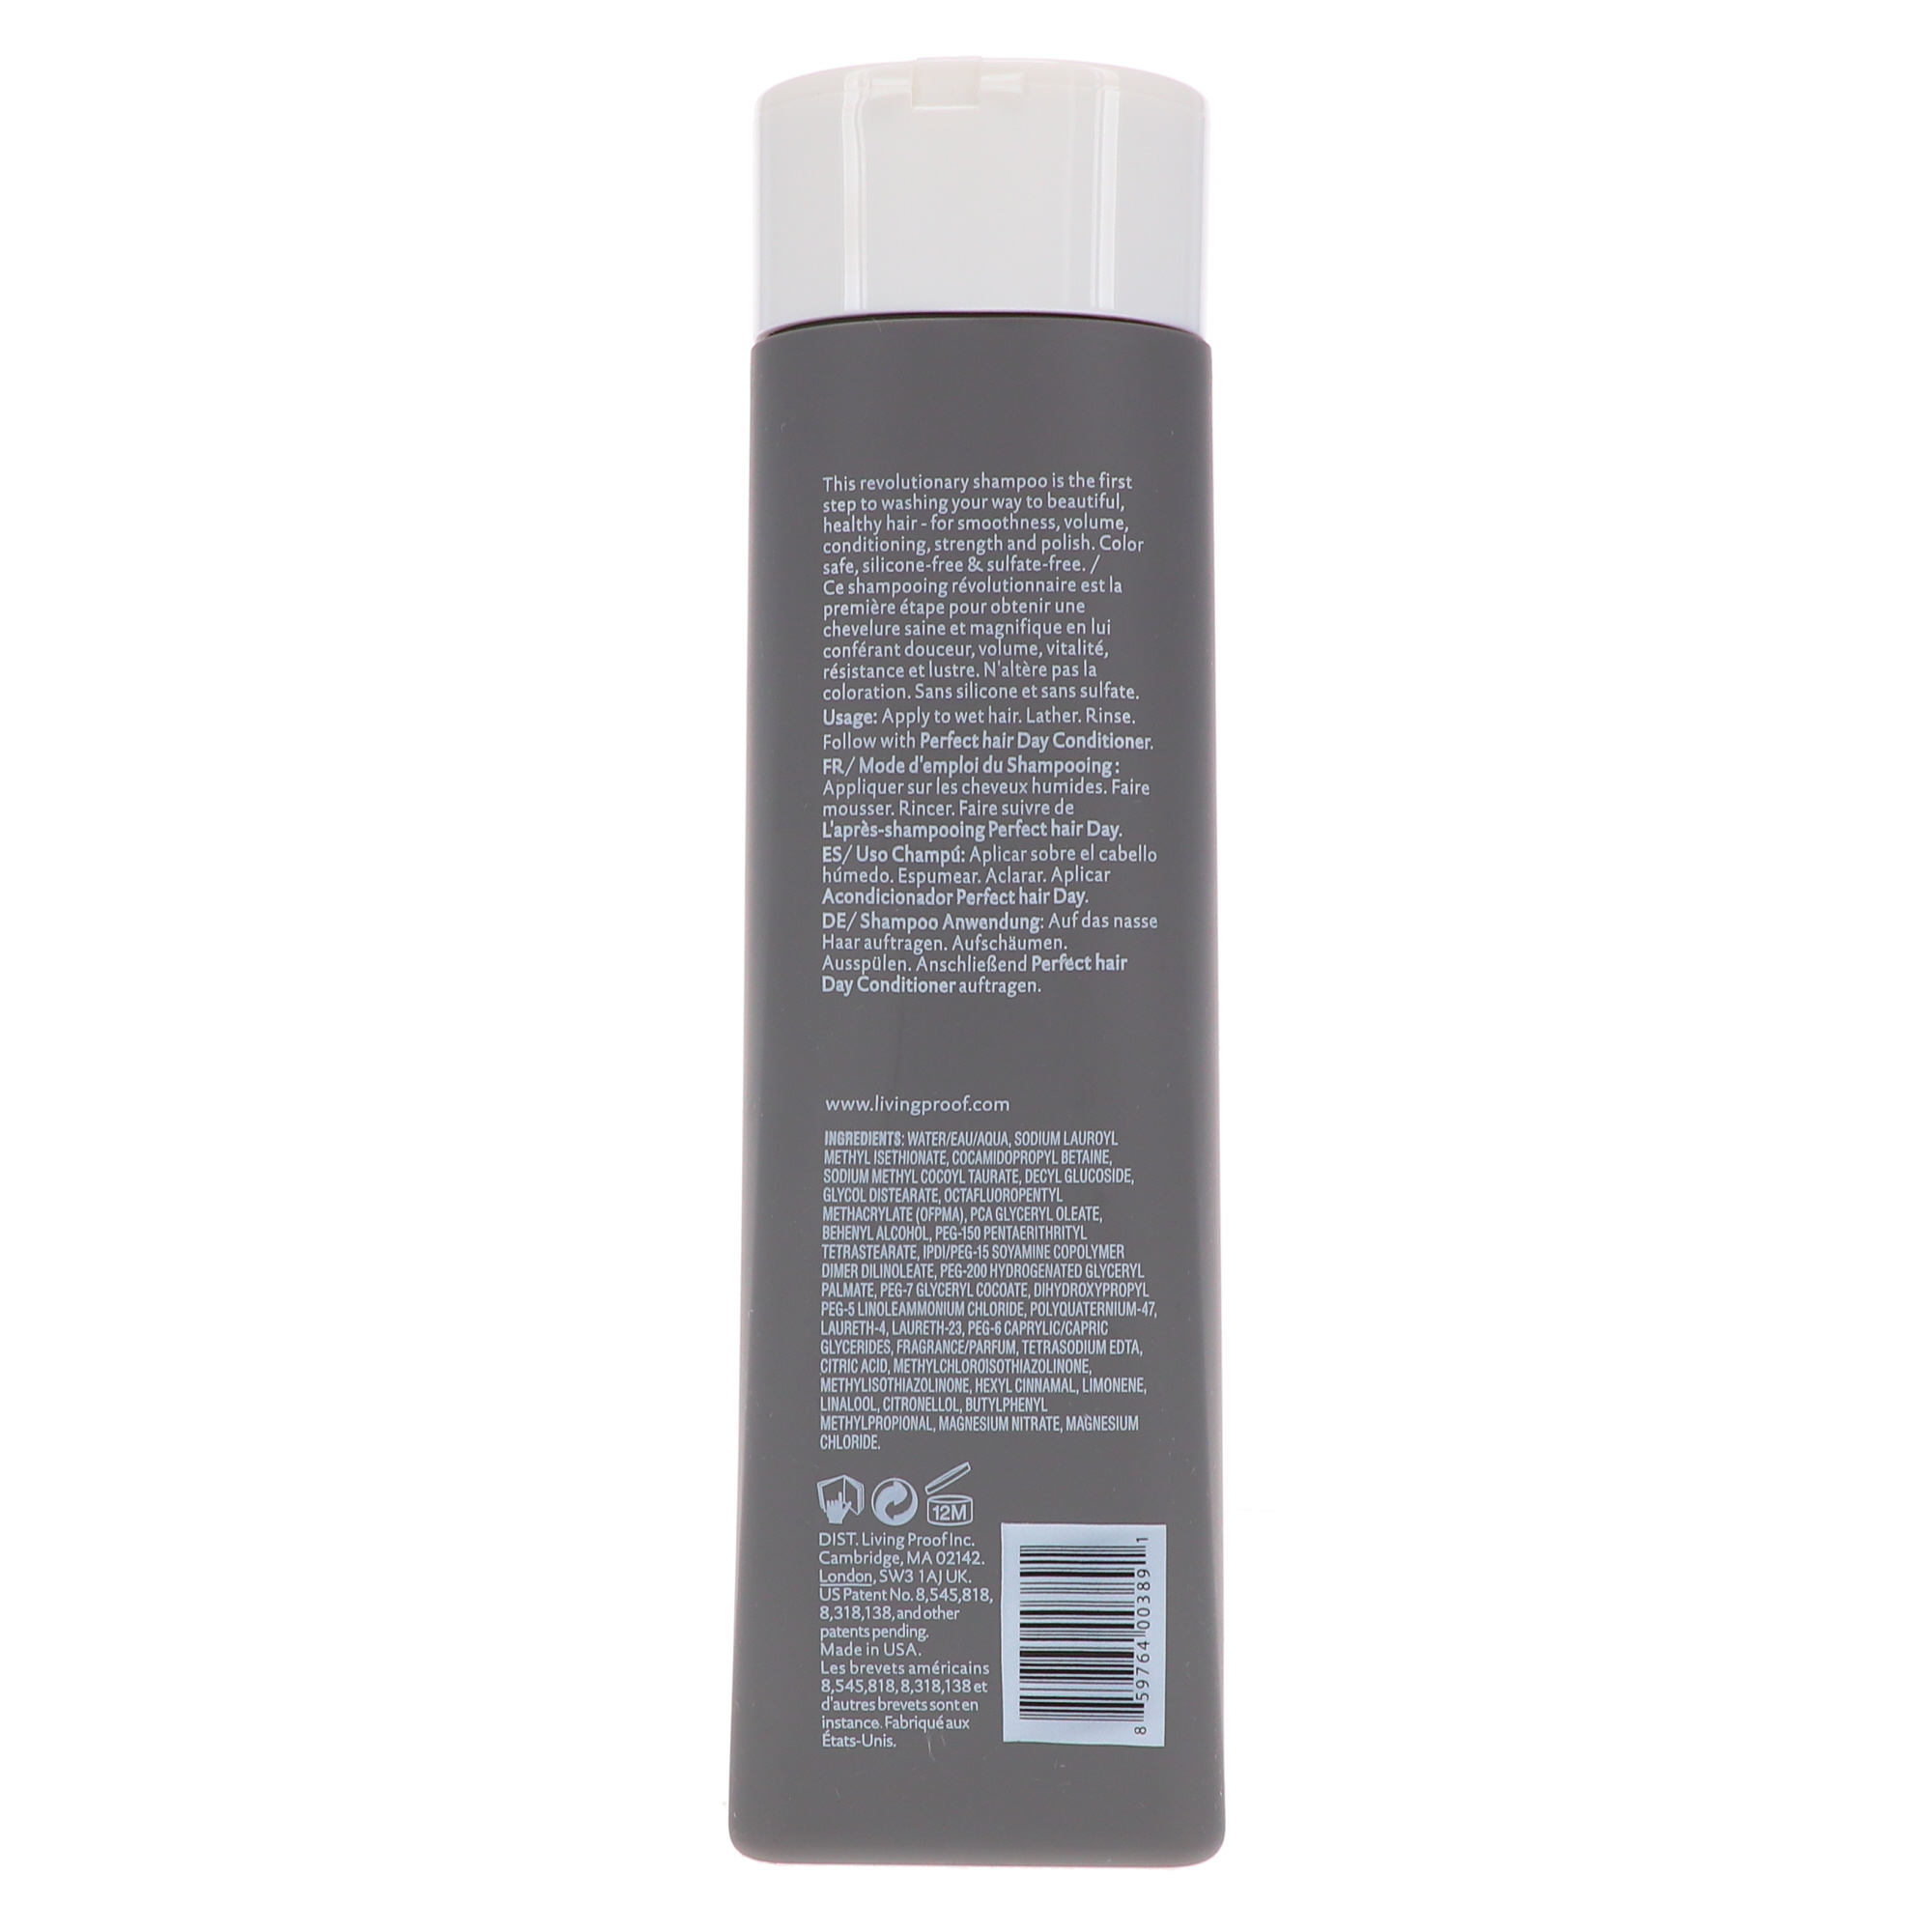 Living Proof Perfect Hair Day Shampoo 8 oz - image 5 of 8